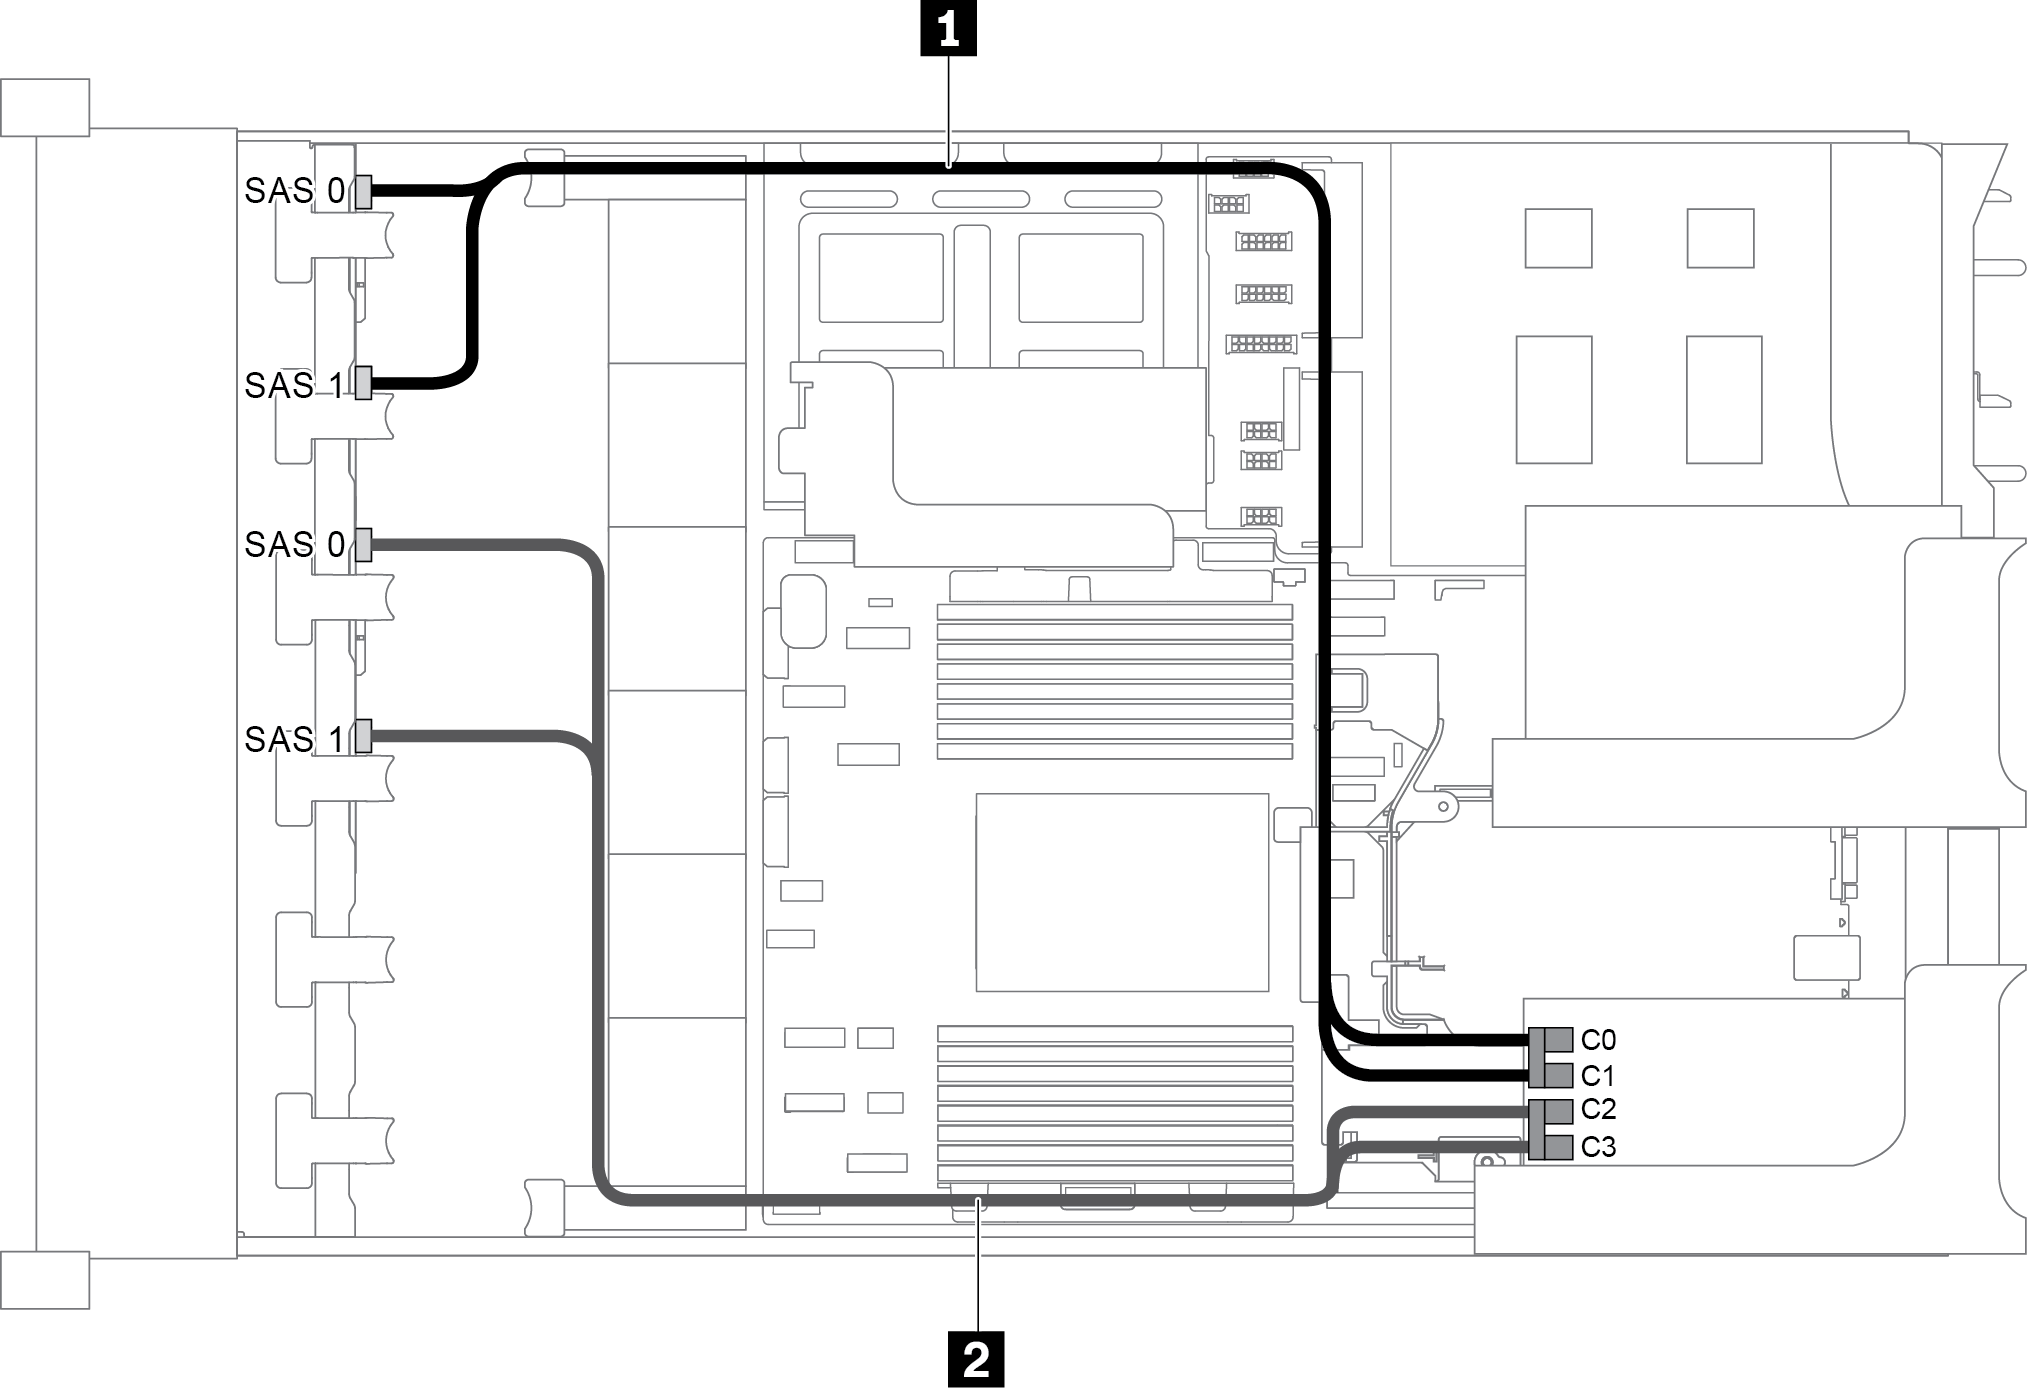 Cable routing for configuration with two 8 x 2.5" SAS/SATA front backplanes and one 16i RAID/HBA adapter